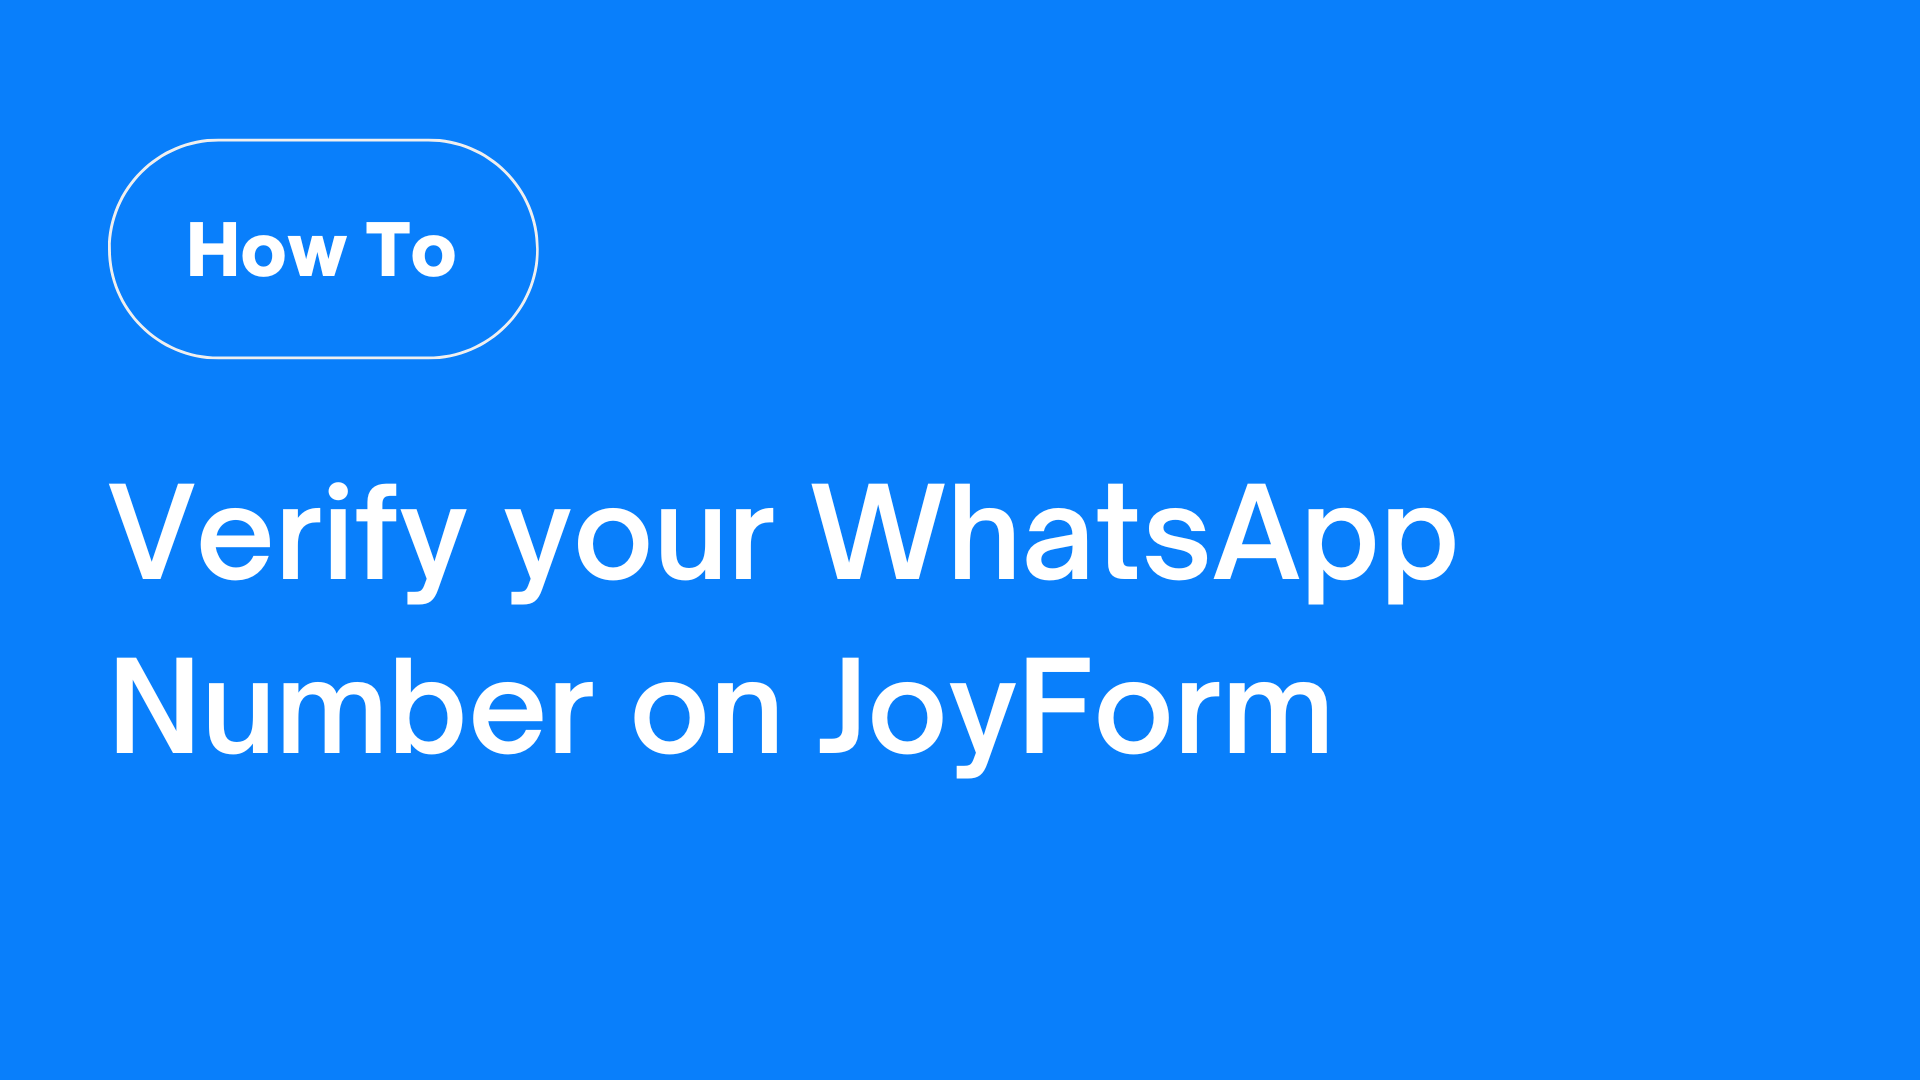 [How To] Verify your WhatsApp Number on JoyForm